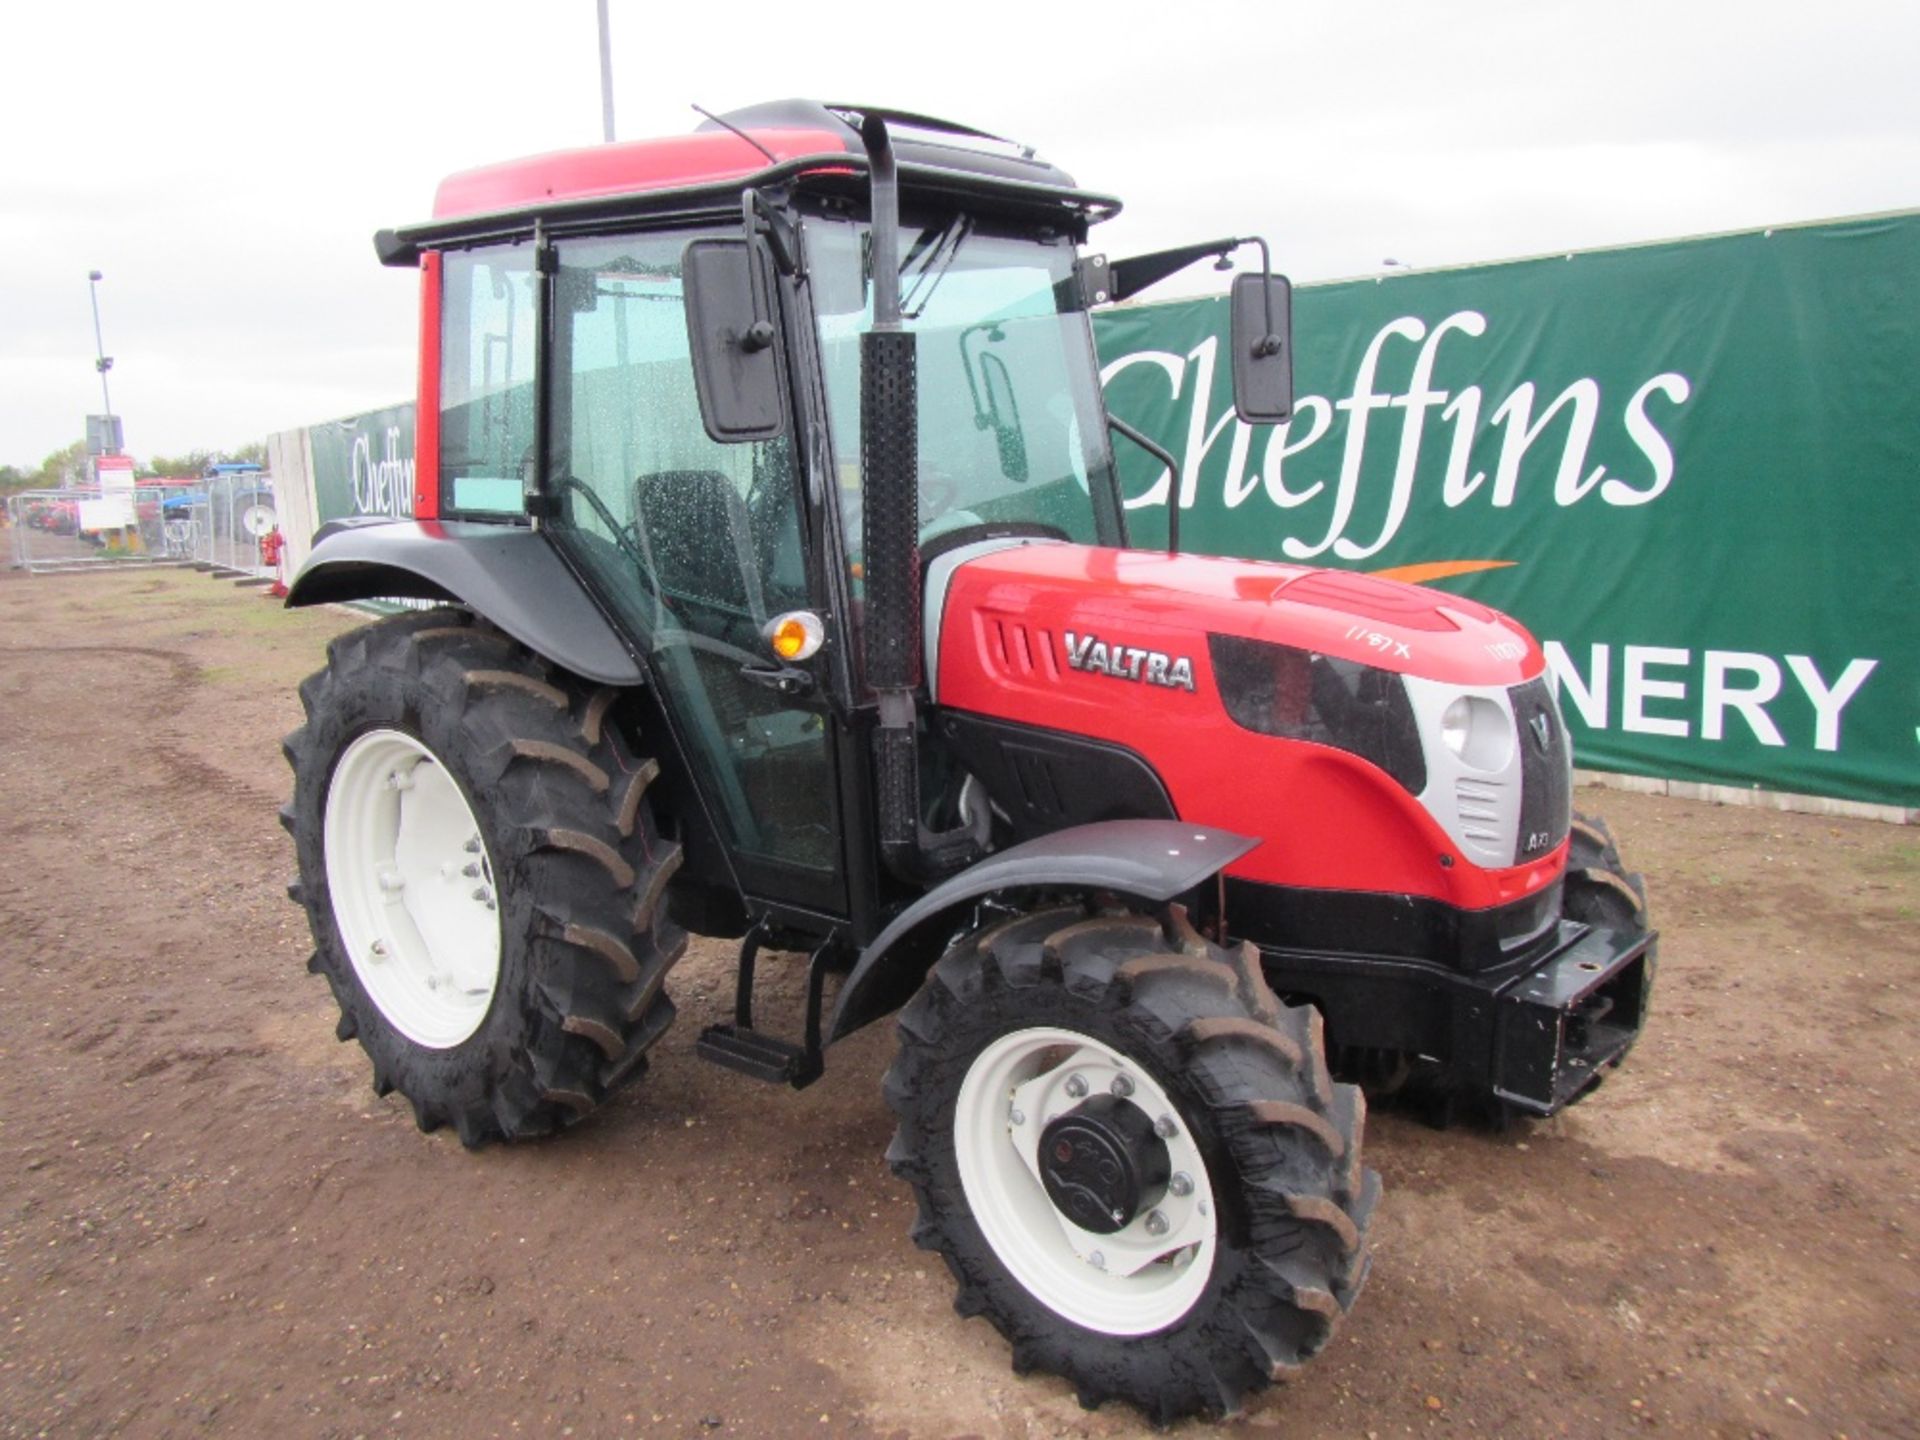 2015 Valtra A73C 4wd Tractor 40k, 12+12 Synchro, Mechanical Shuttle, 2 Spools, Air Con, 540/540E - Image 3 of 17